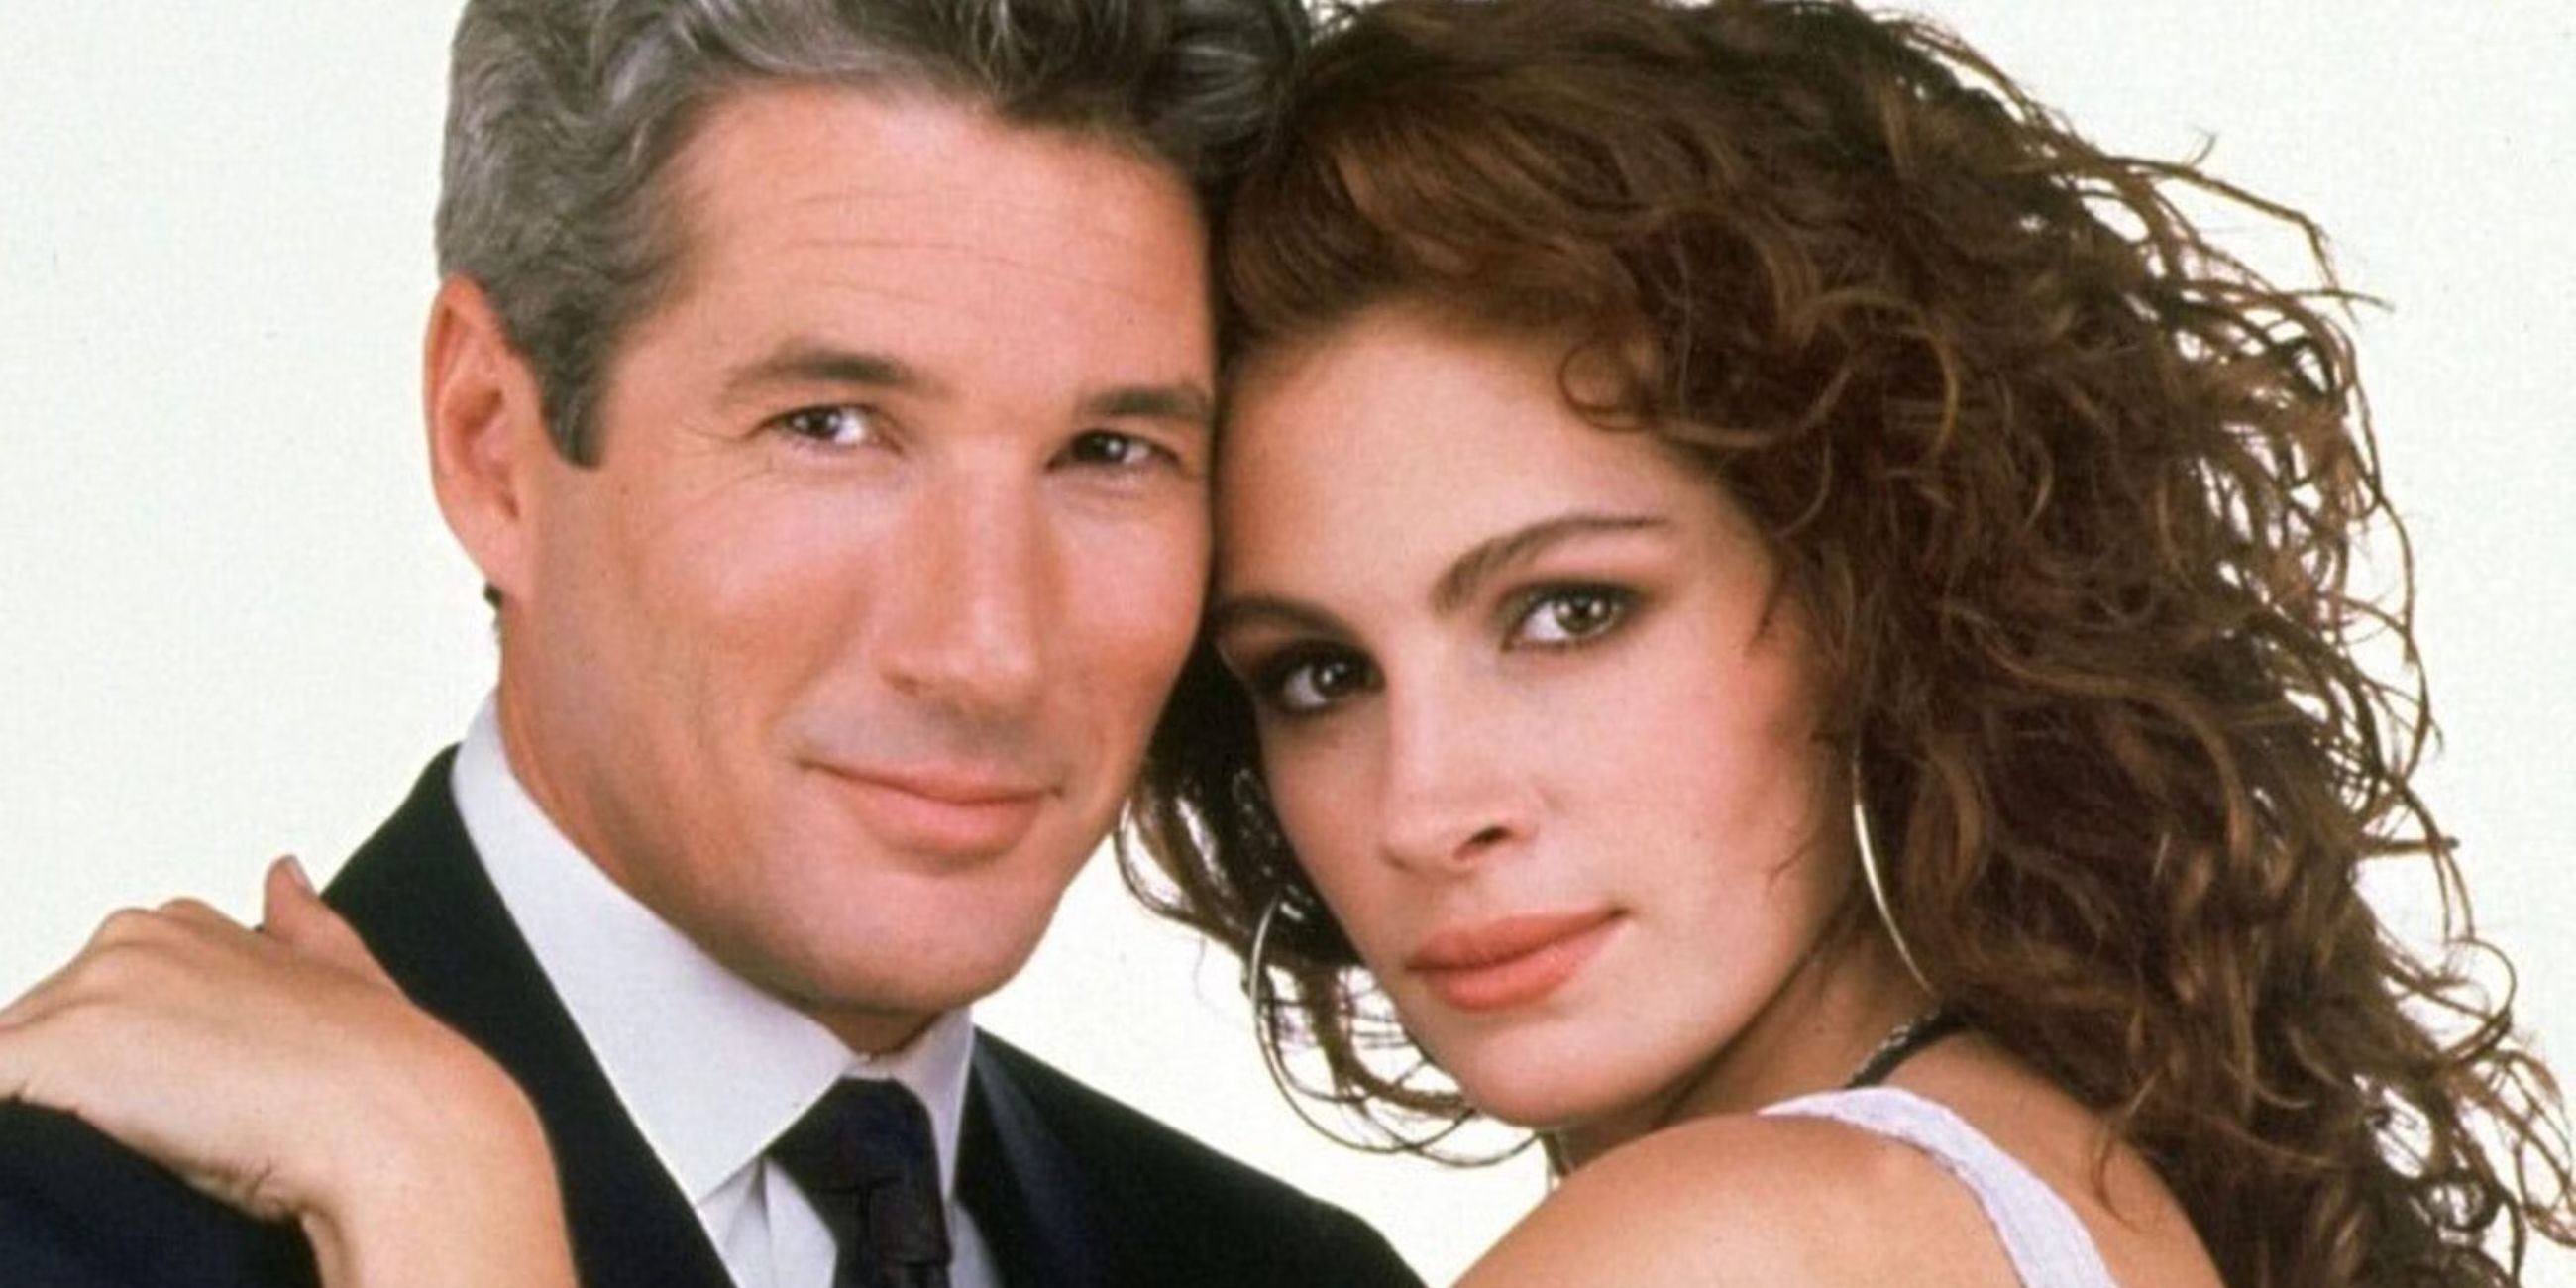 Richard Gere’s Pretty Woman Character Has A Grim Post-Movie Fate According To Julia Roberts